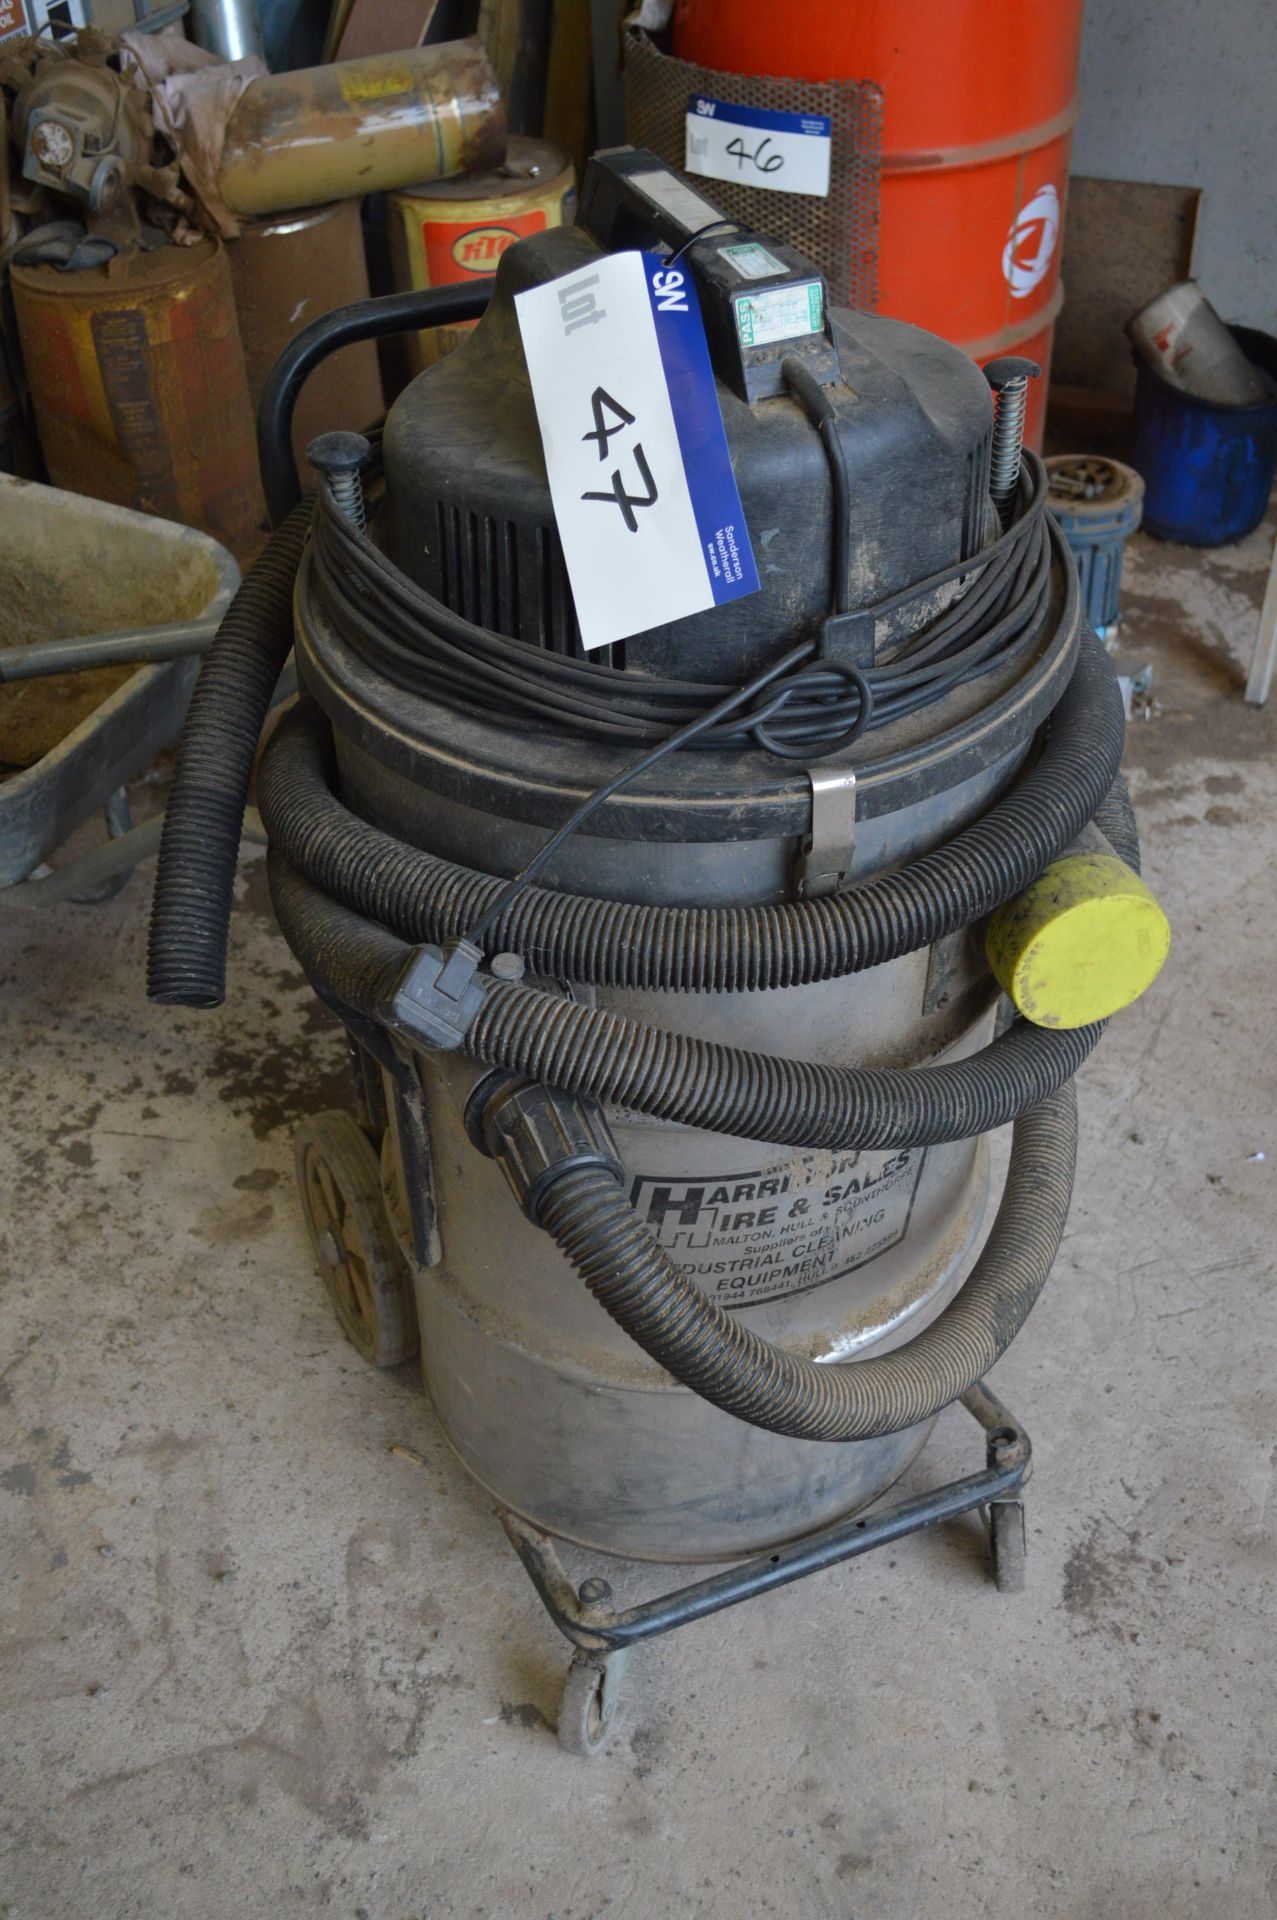 Harrison Portable Industrial Vacuum Cleaner, 240V, (please note this lot is part of combination